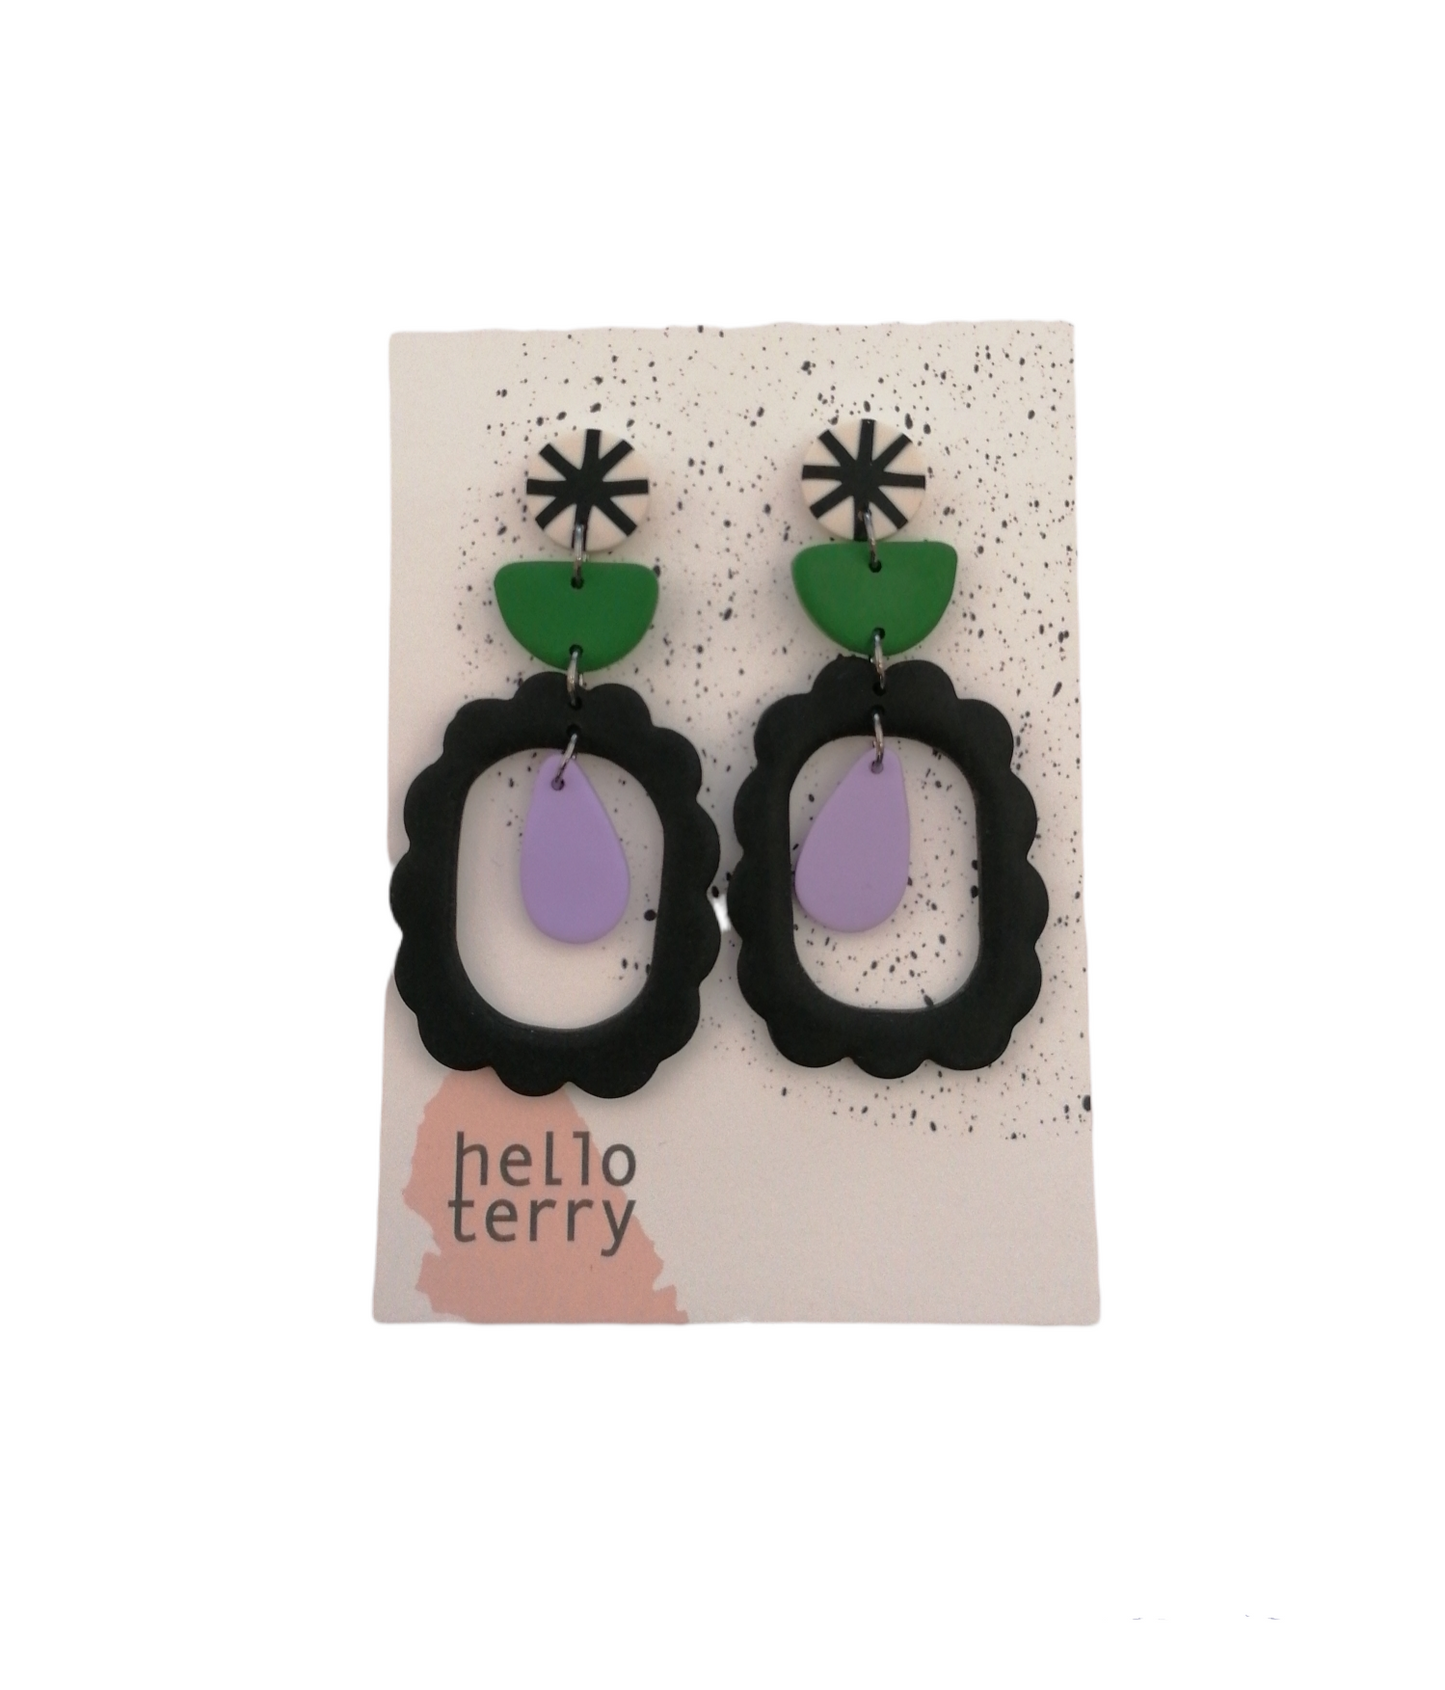 JEWLLERY: Hello Terry - Green, Lilac and Black Earrings